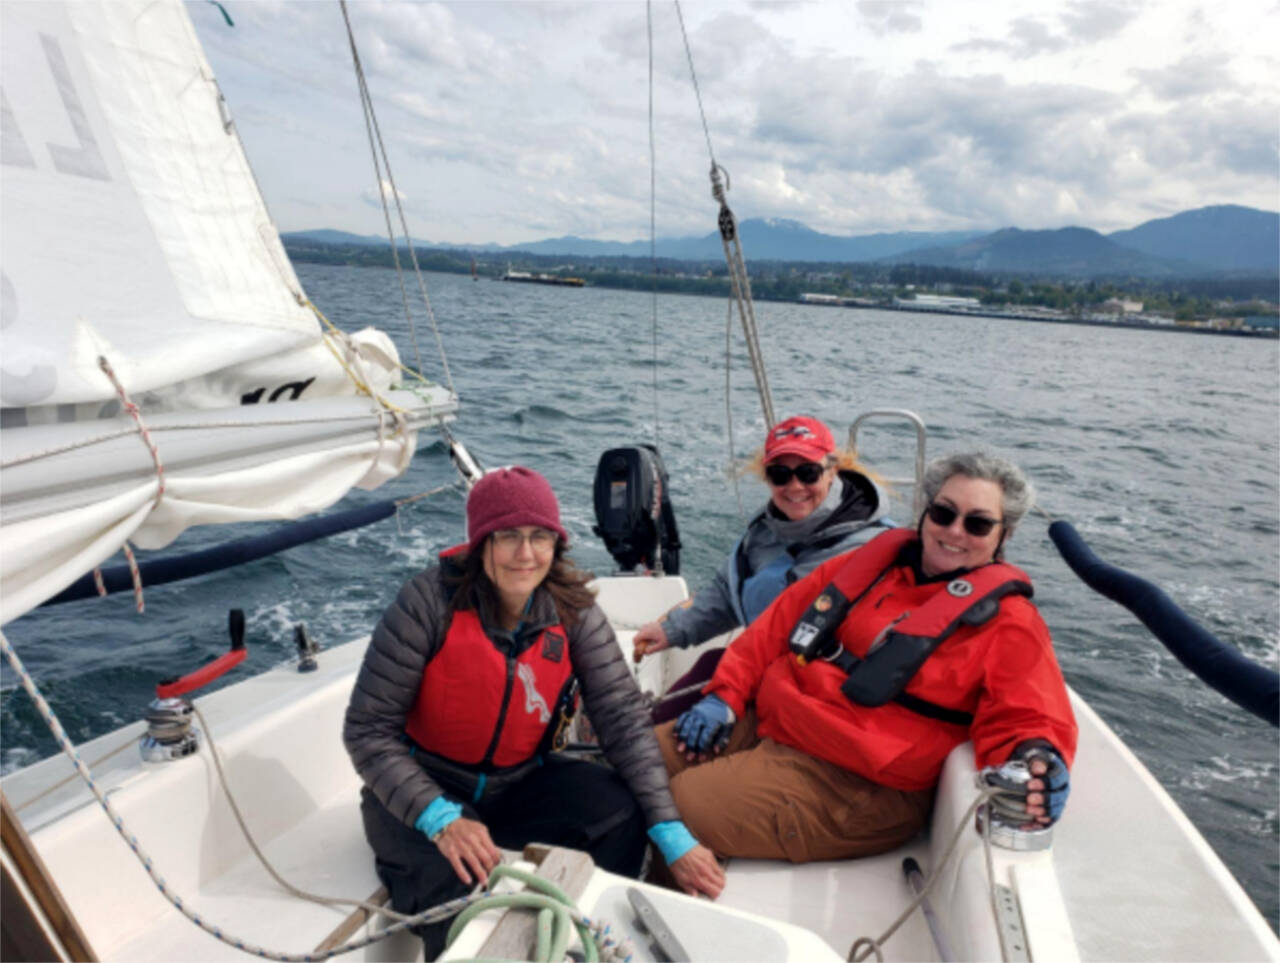 From left, students Theresa Tetreau, Karena Stocket and Kelly-Anne Kirk on the water as part of the Community Boating Program’s women’s sailing program. (Courtesy photo)